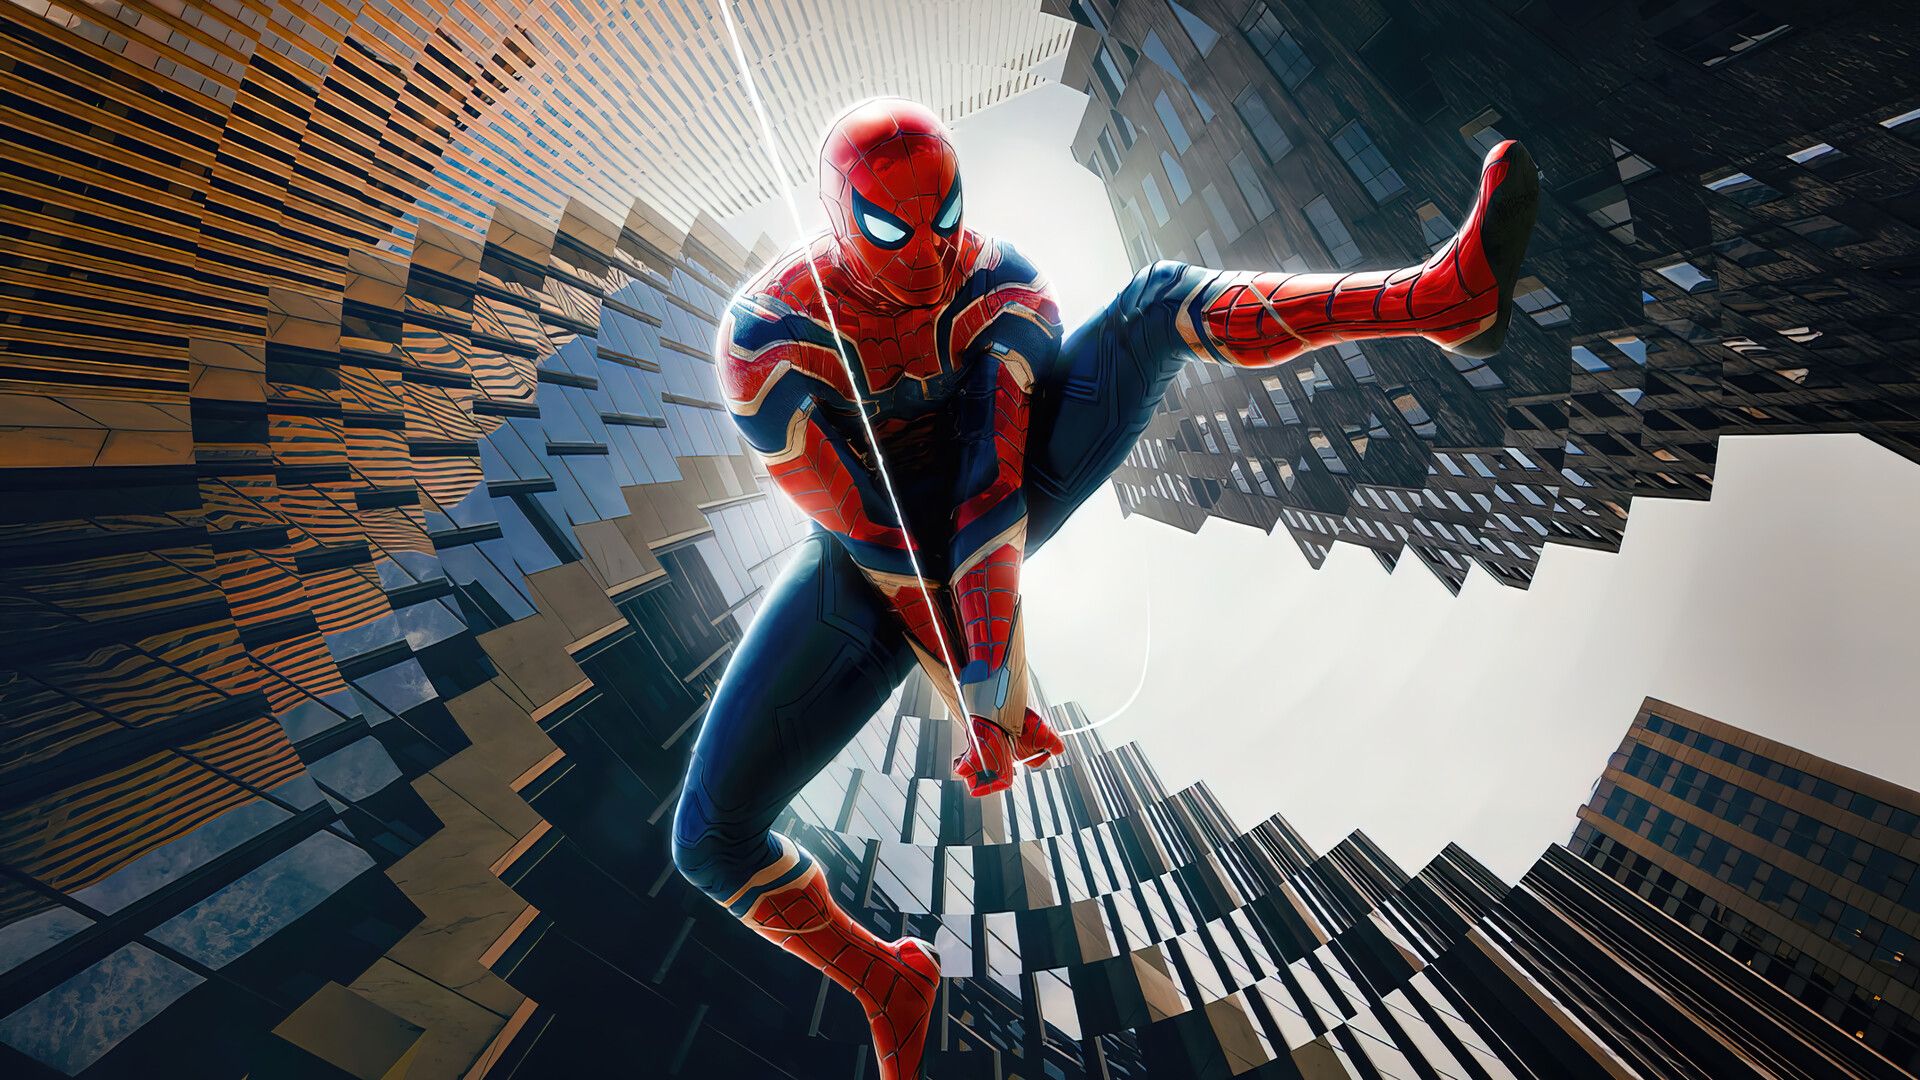 All Mobile New Wallpaper HD Spiderman  New wallpaper hd Hd wallpapers for  mobile Android wallpaper